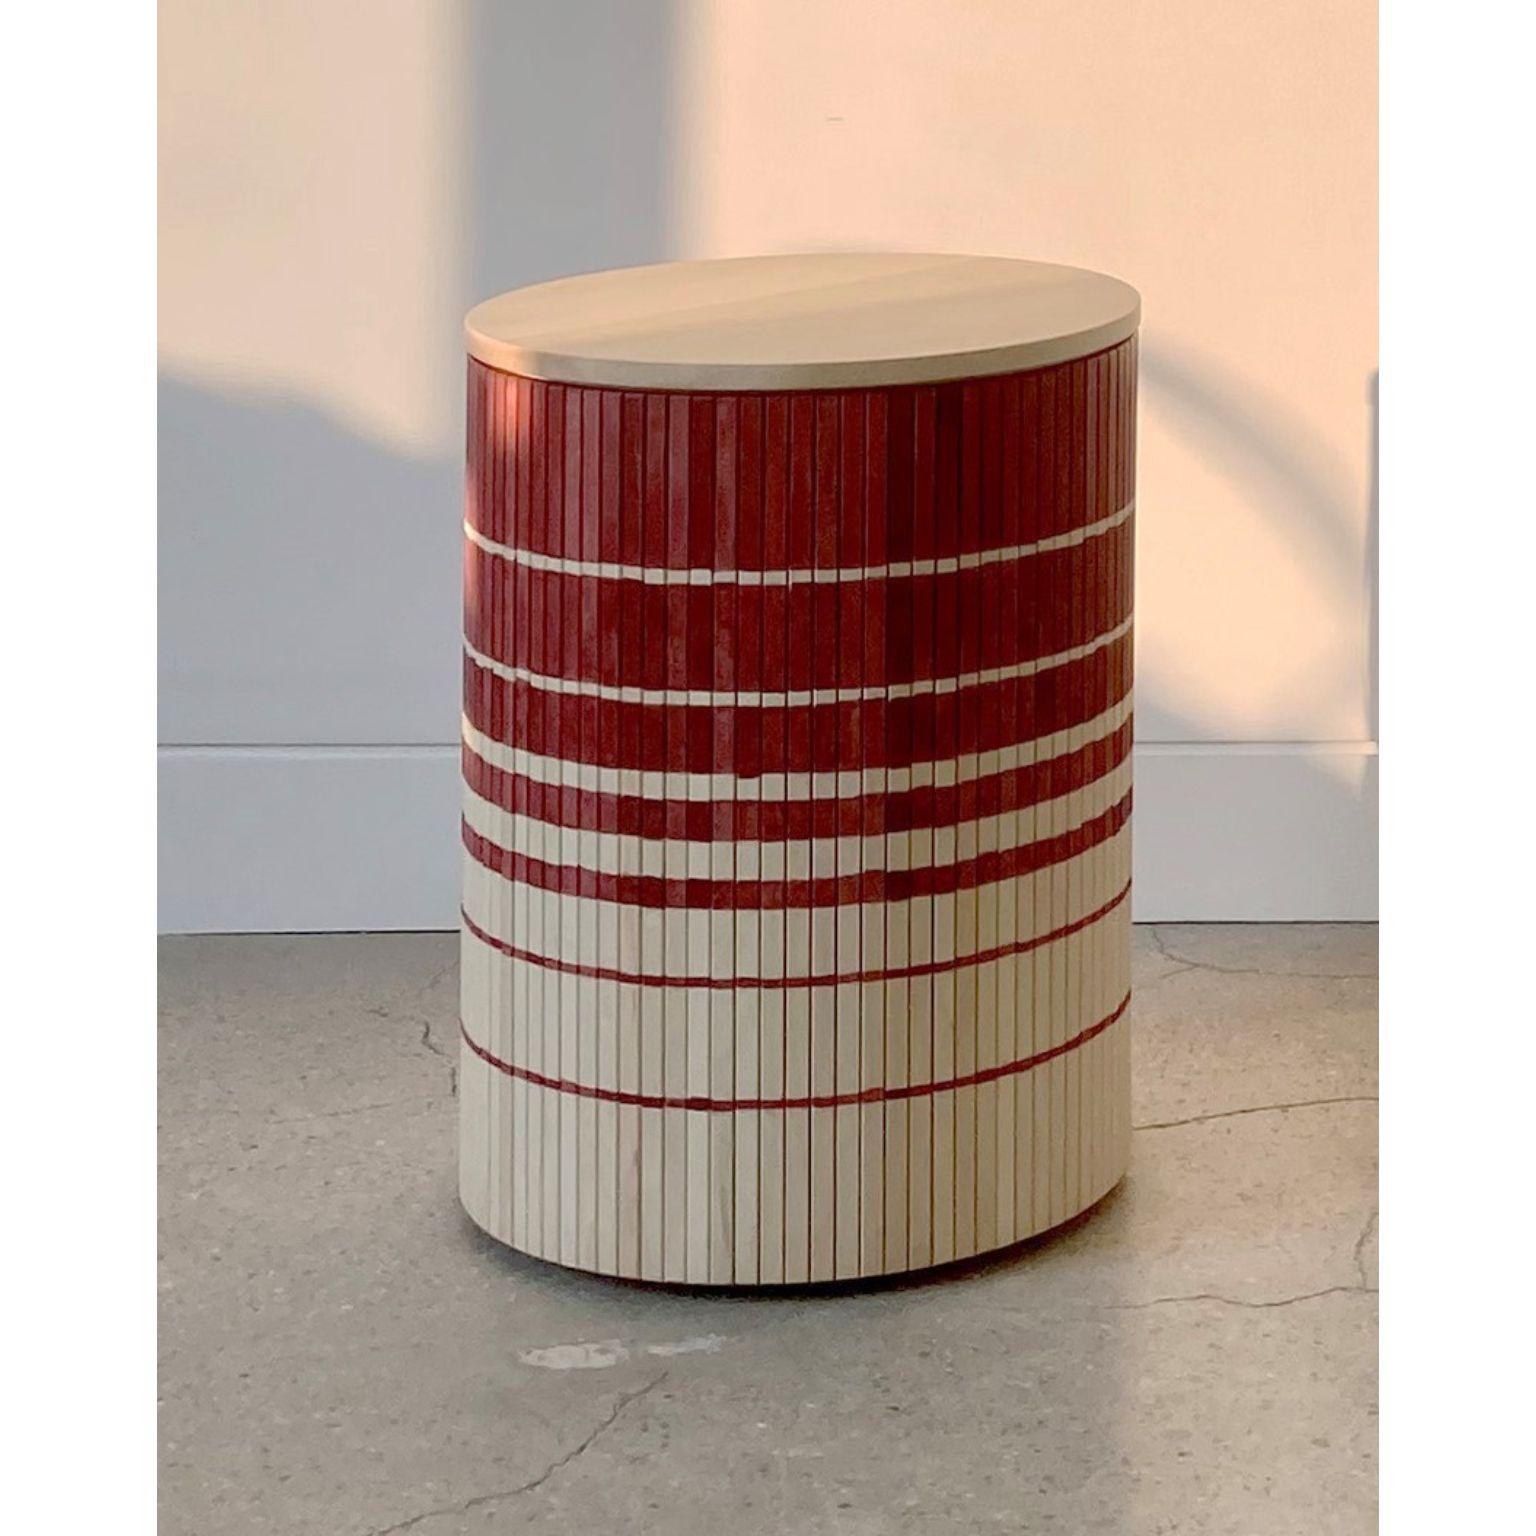 Ikat end table with storage by Indo Made
One of a kind.
Dimensions: Ø40.6 X H53.3 cm 
Materials: Maple.
Also available in other materials and finishes.

Each piece is carefully handcrafted by our team using natural materials and traditional